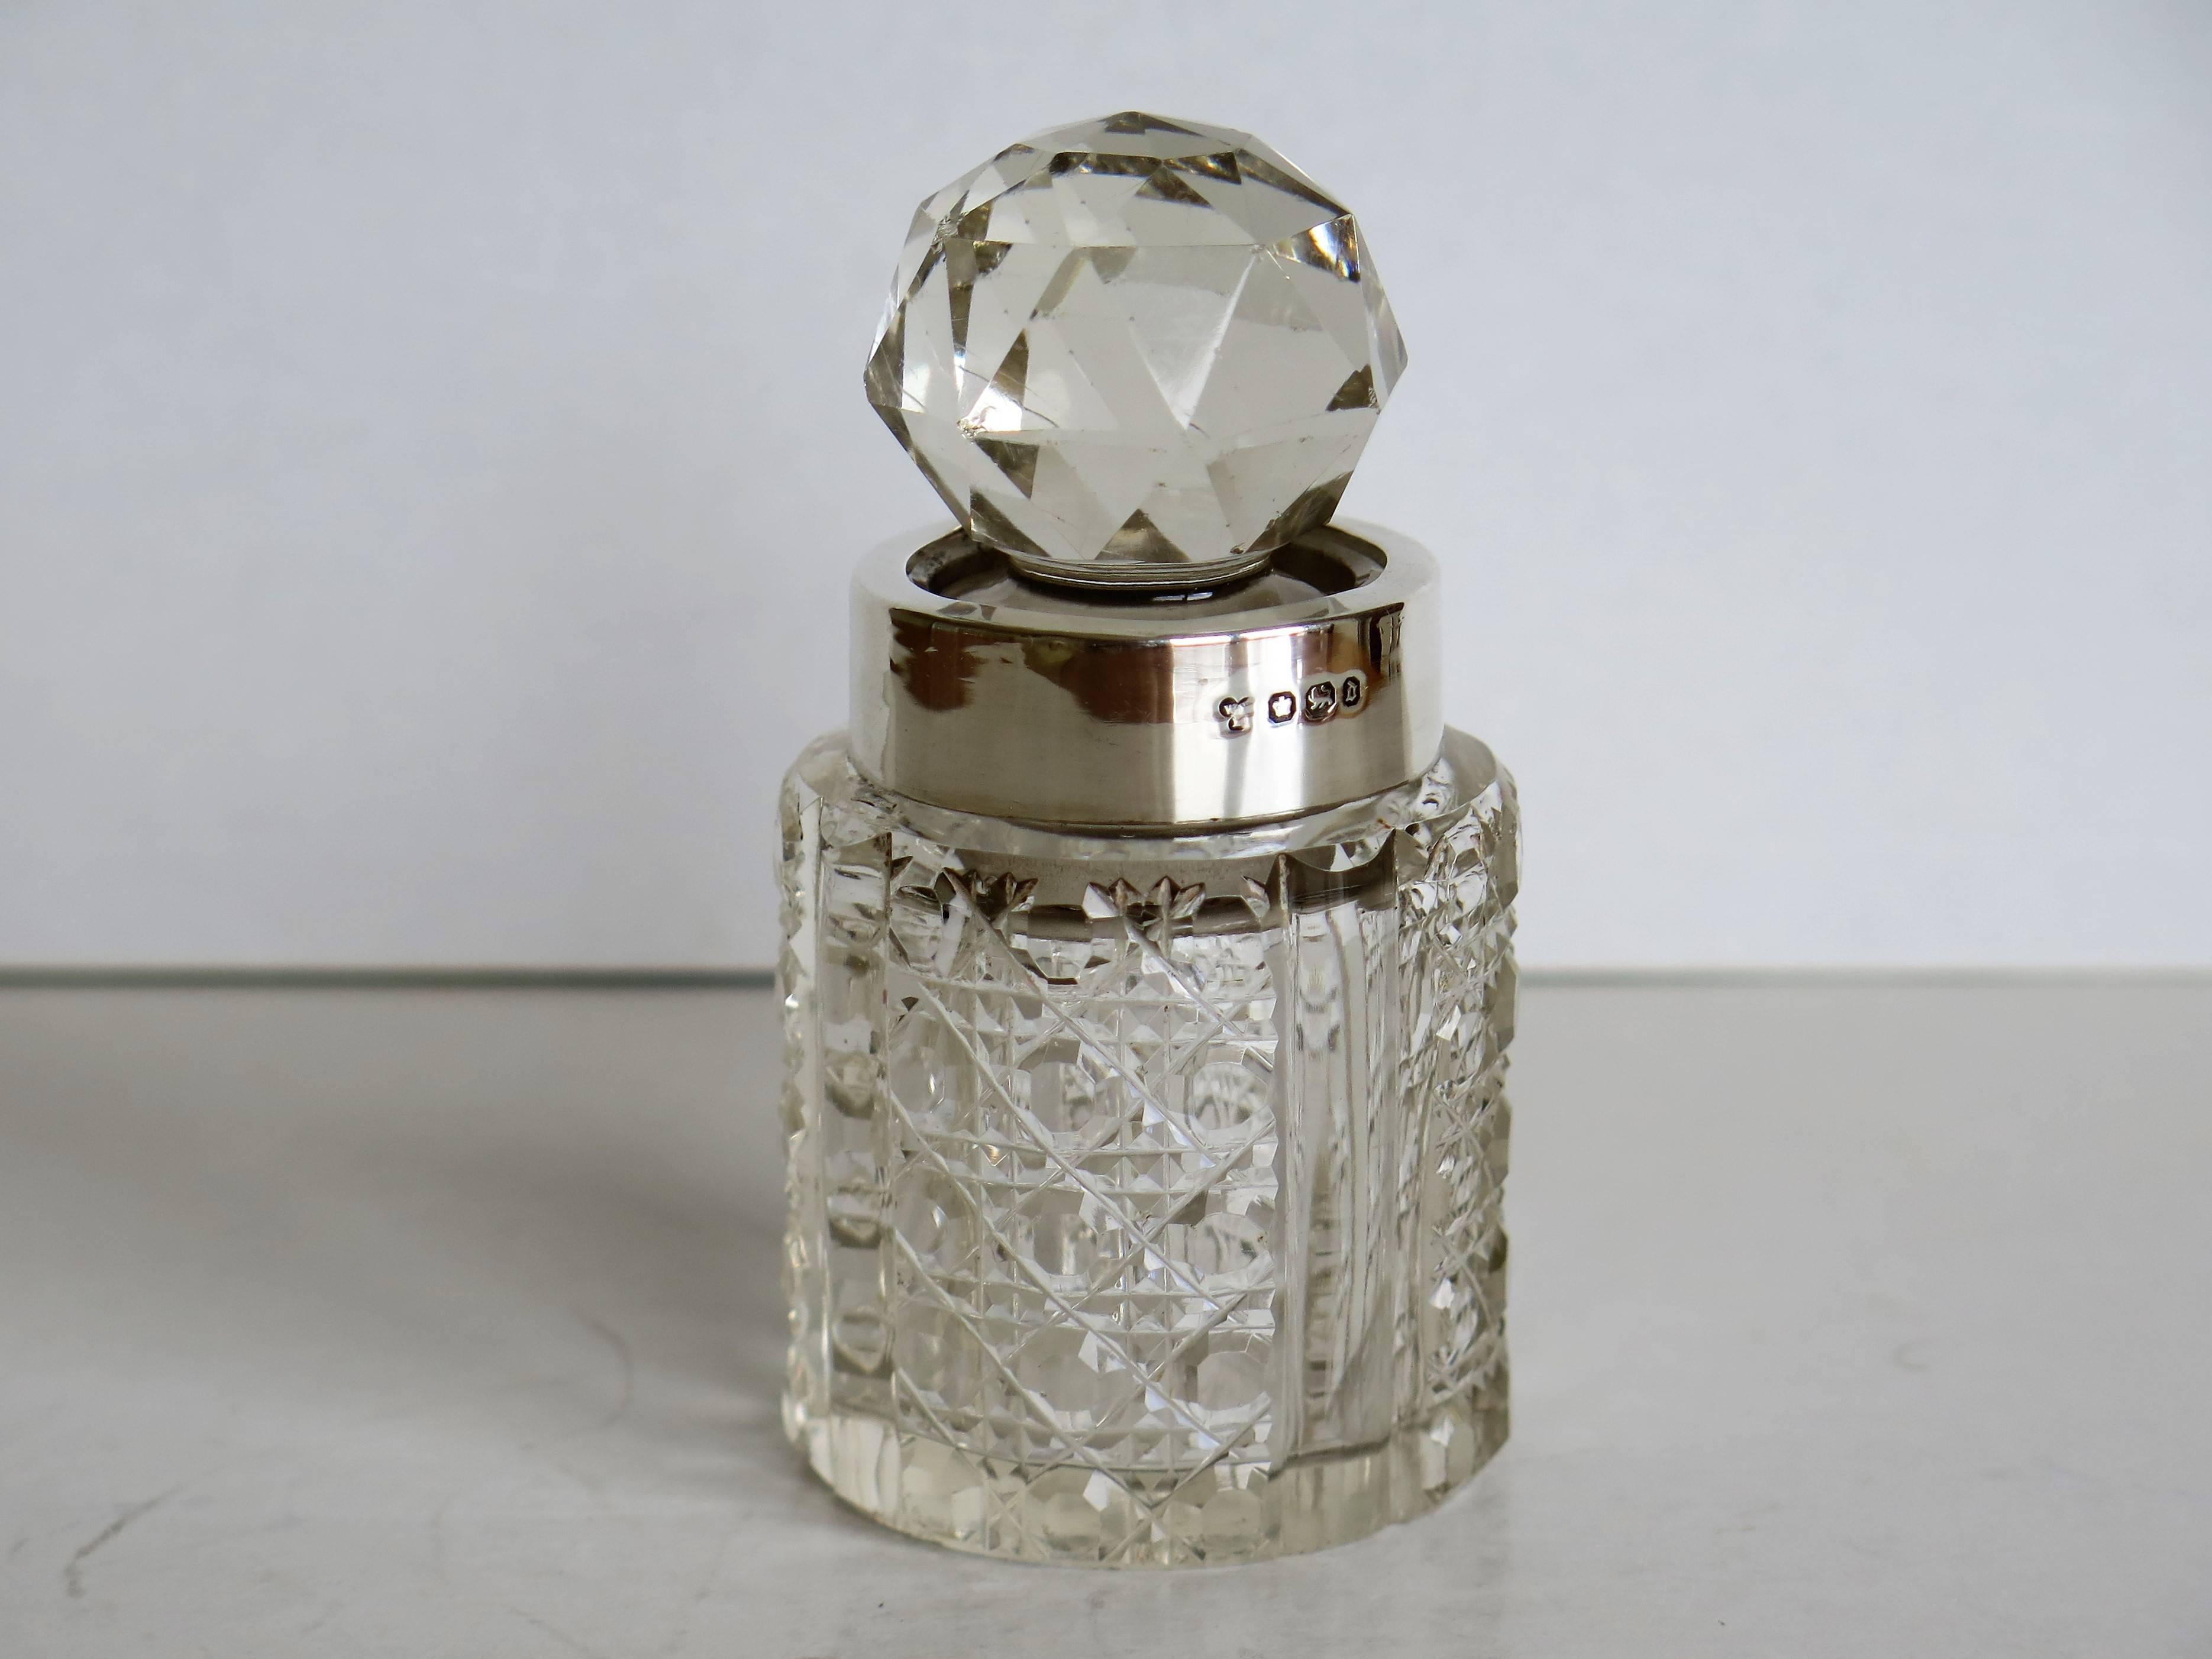 This is an attractive Victorian cut glass or crystal perfume bottle with a sterling silver neck ring made by William Harrison of Sheffield, England in 1896. 

The bottle has a slightly oval shape with four vertical flutes and decorative diamond cut